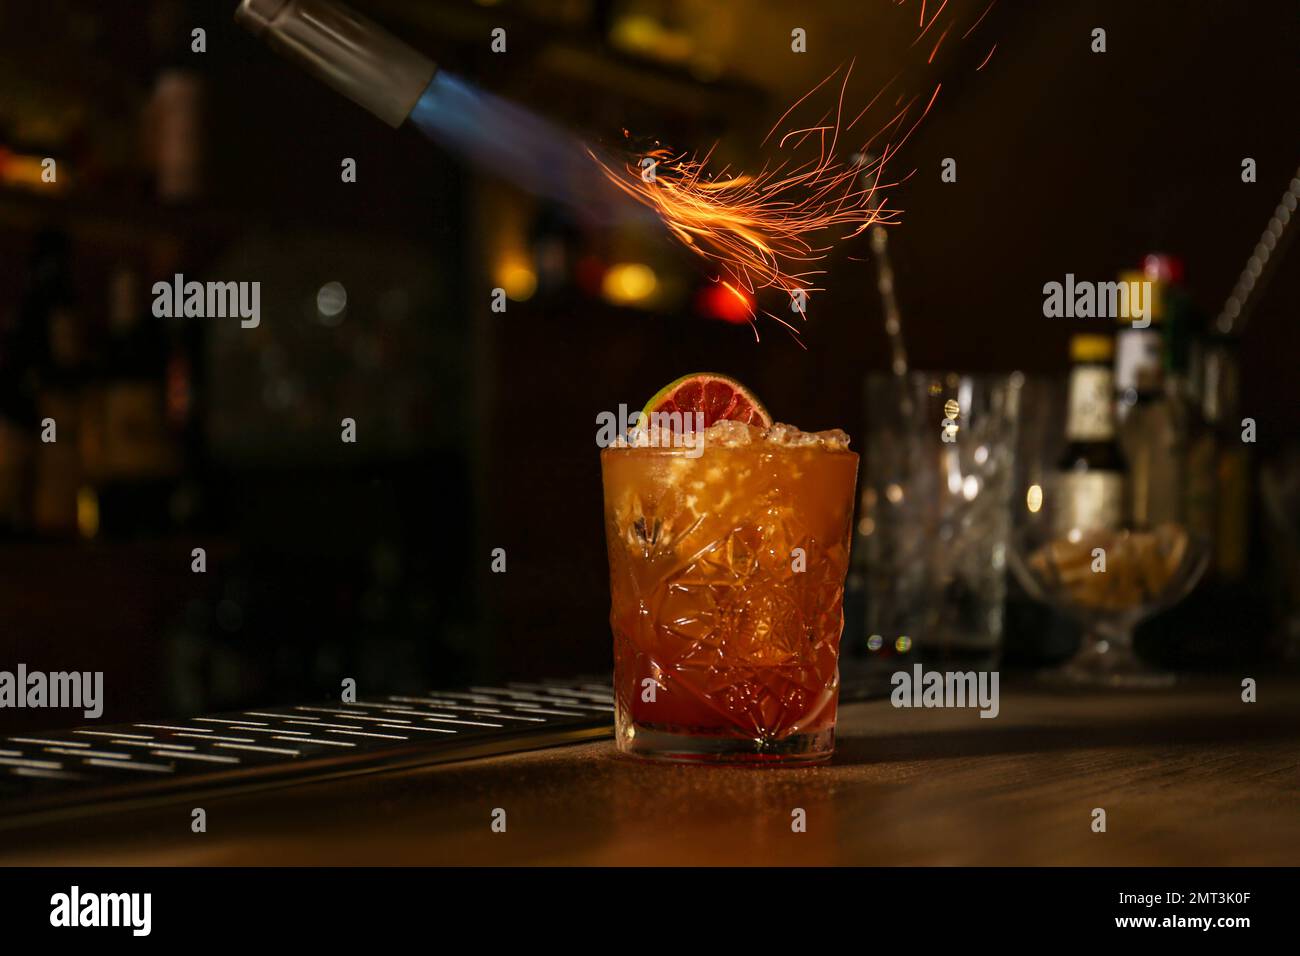 Preparing fresh alcoholic cocktail with flame at bar counter Stock Photo